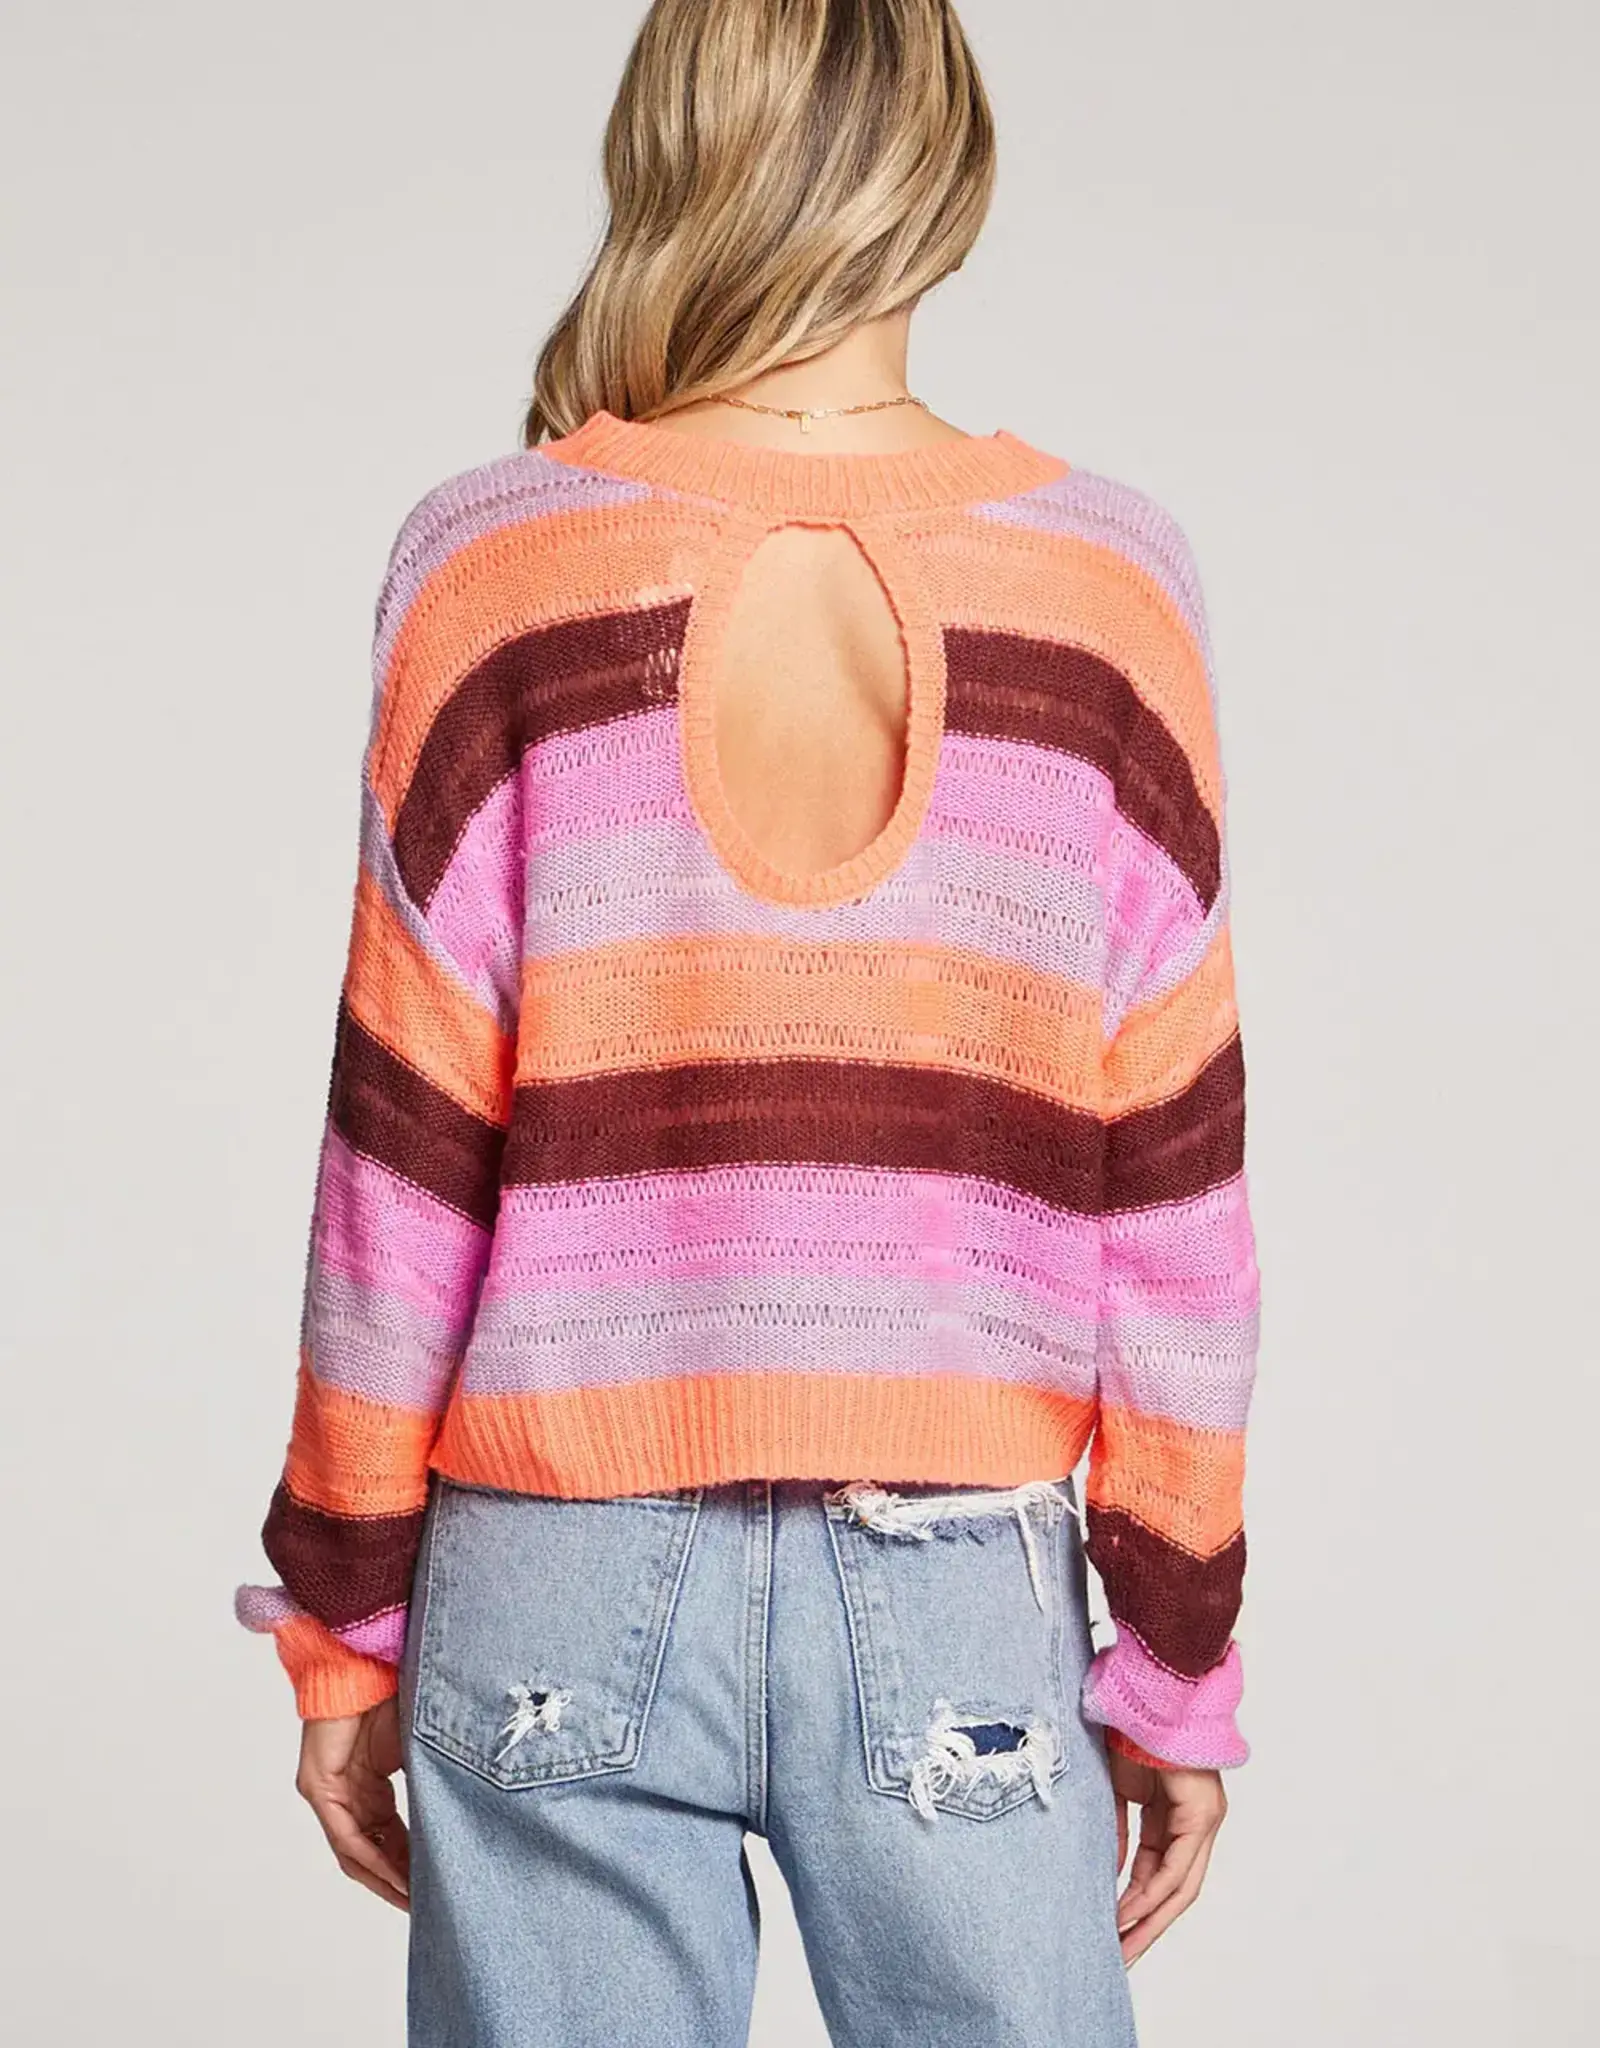 Saltwater Luxe Saltwater Luxe L/S Sweater Multi